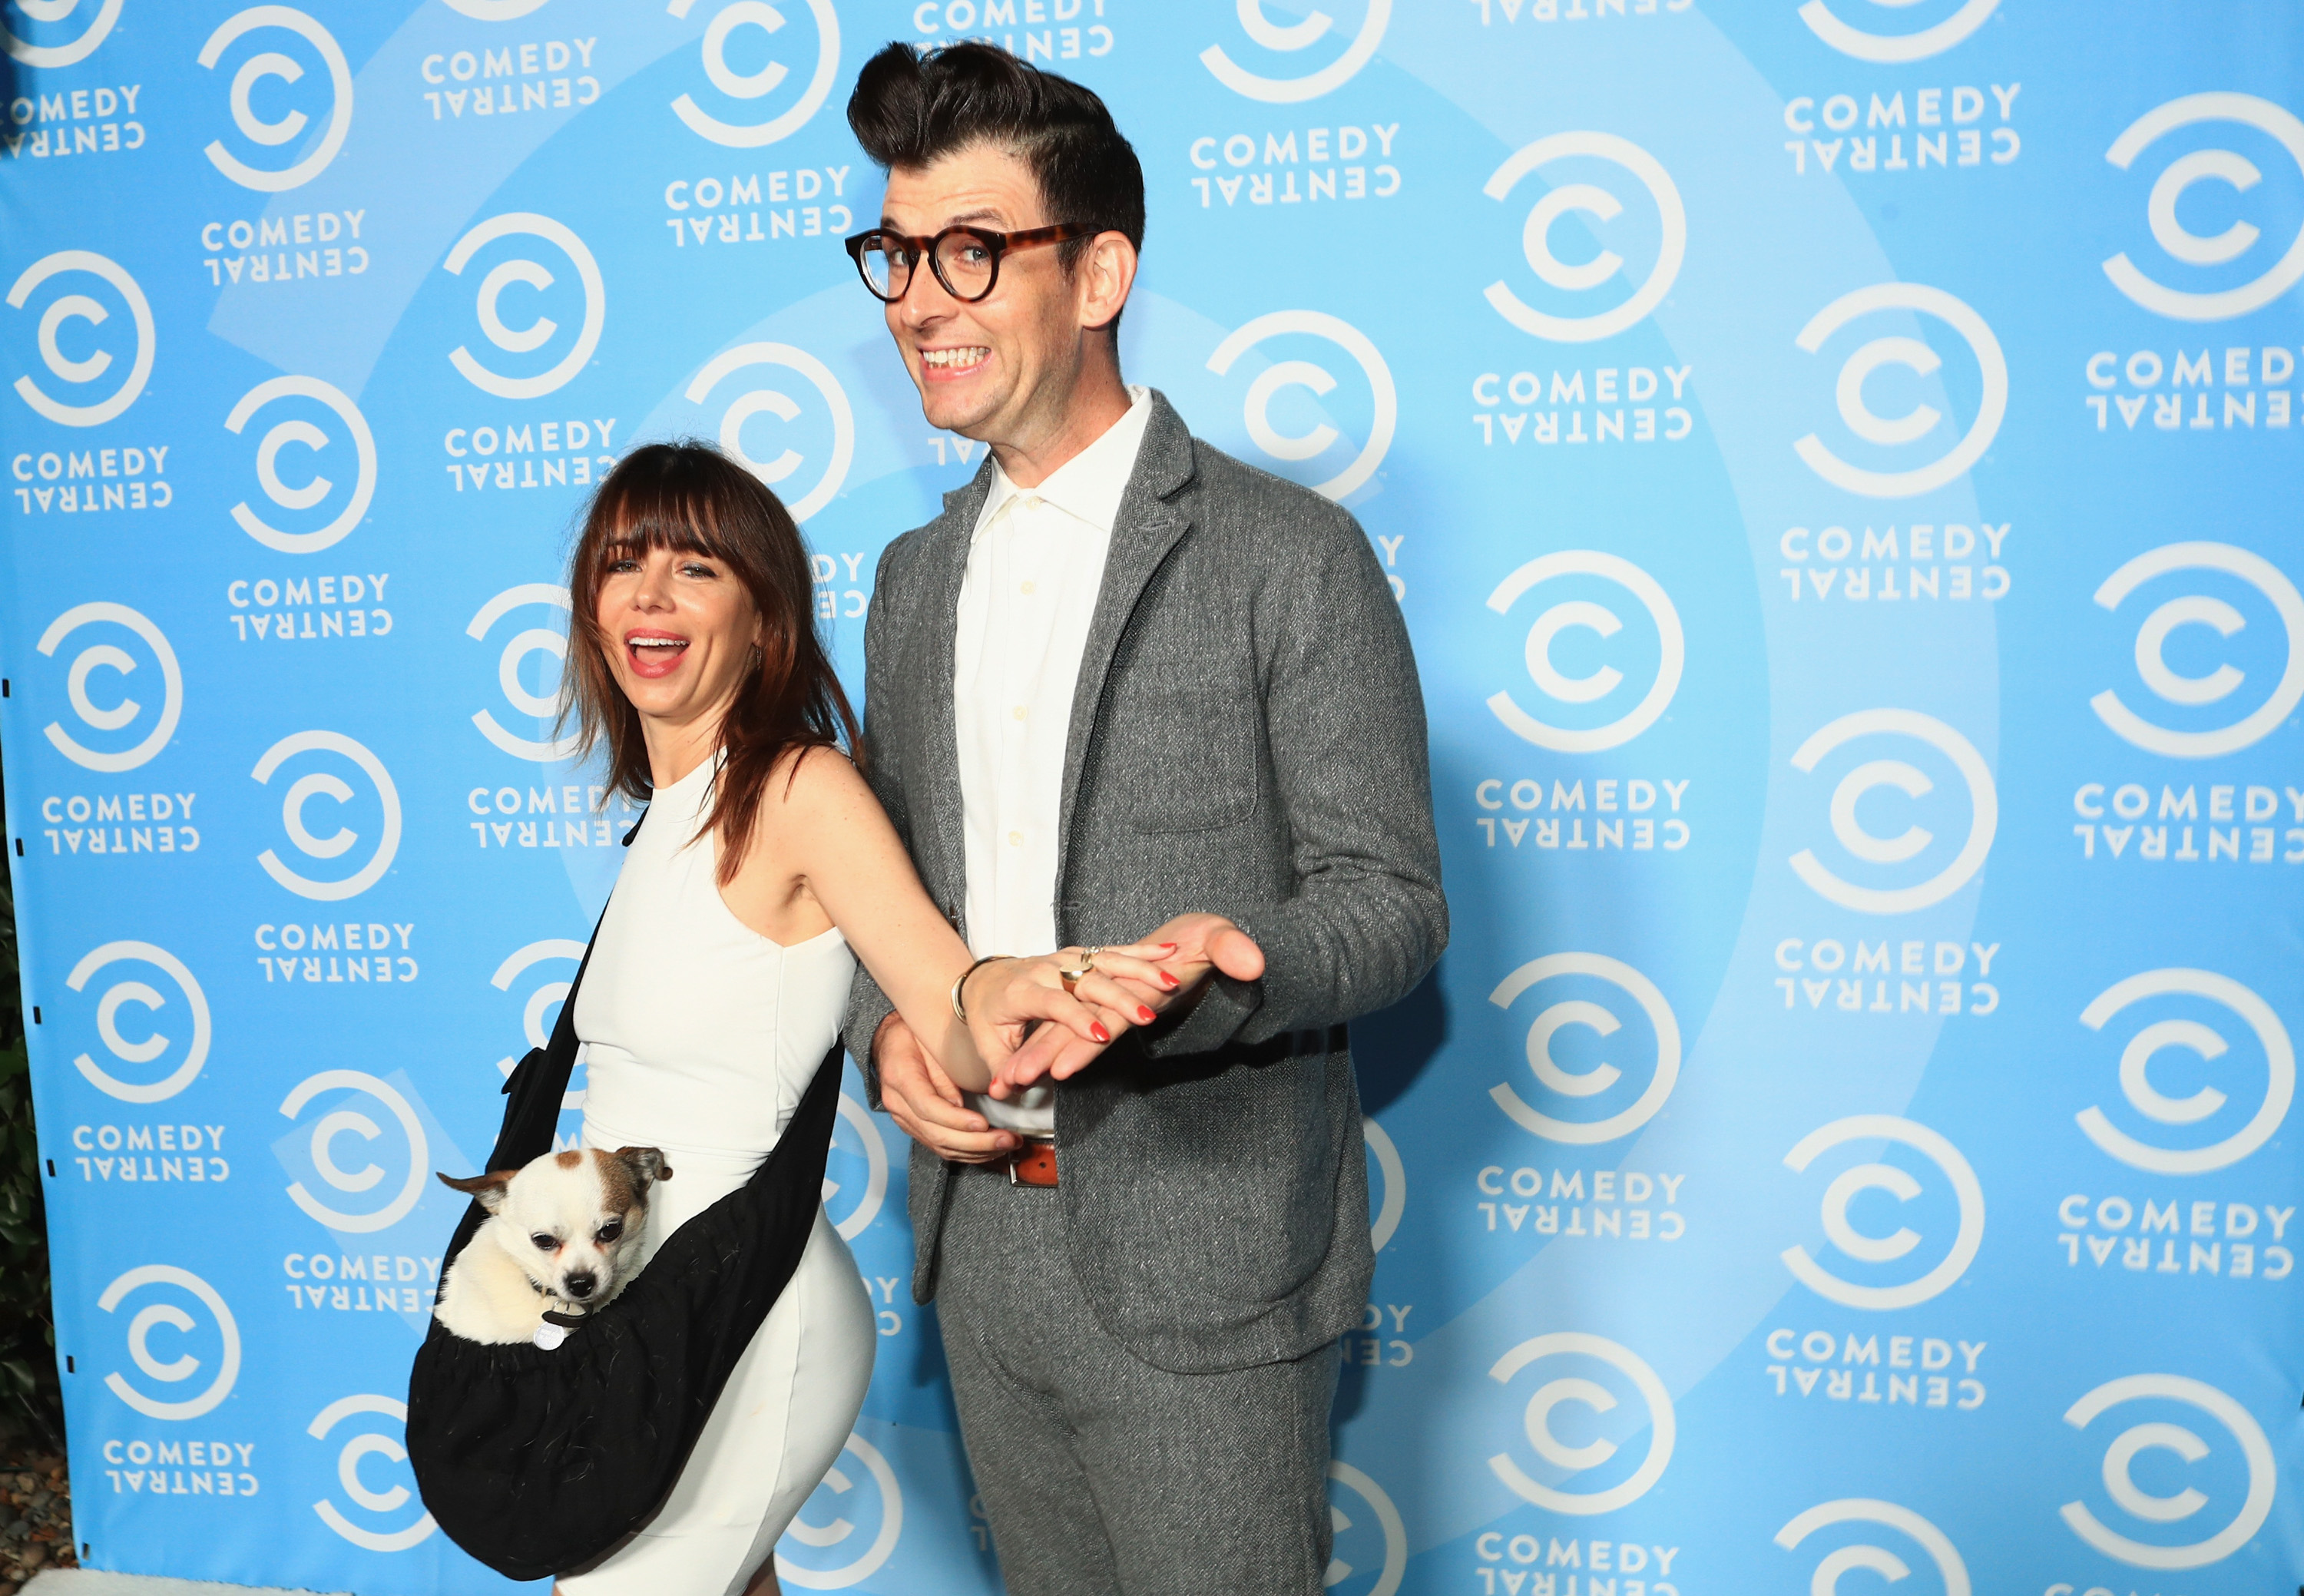 Comedians Natasha Leggero and Moshe Kasher attend the Comedy Central Pre-Emmys Party at Boulevard3, on September 17, 2016, in Hollywood, California. | Source: Getty Images